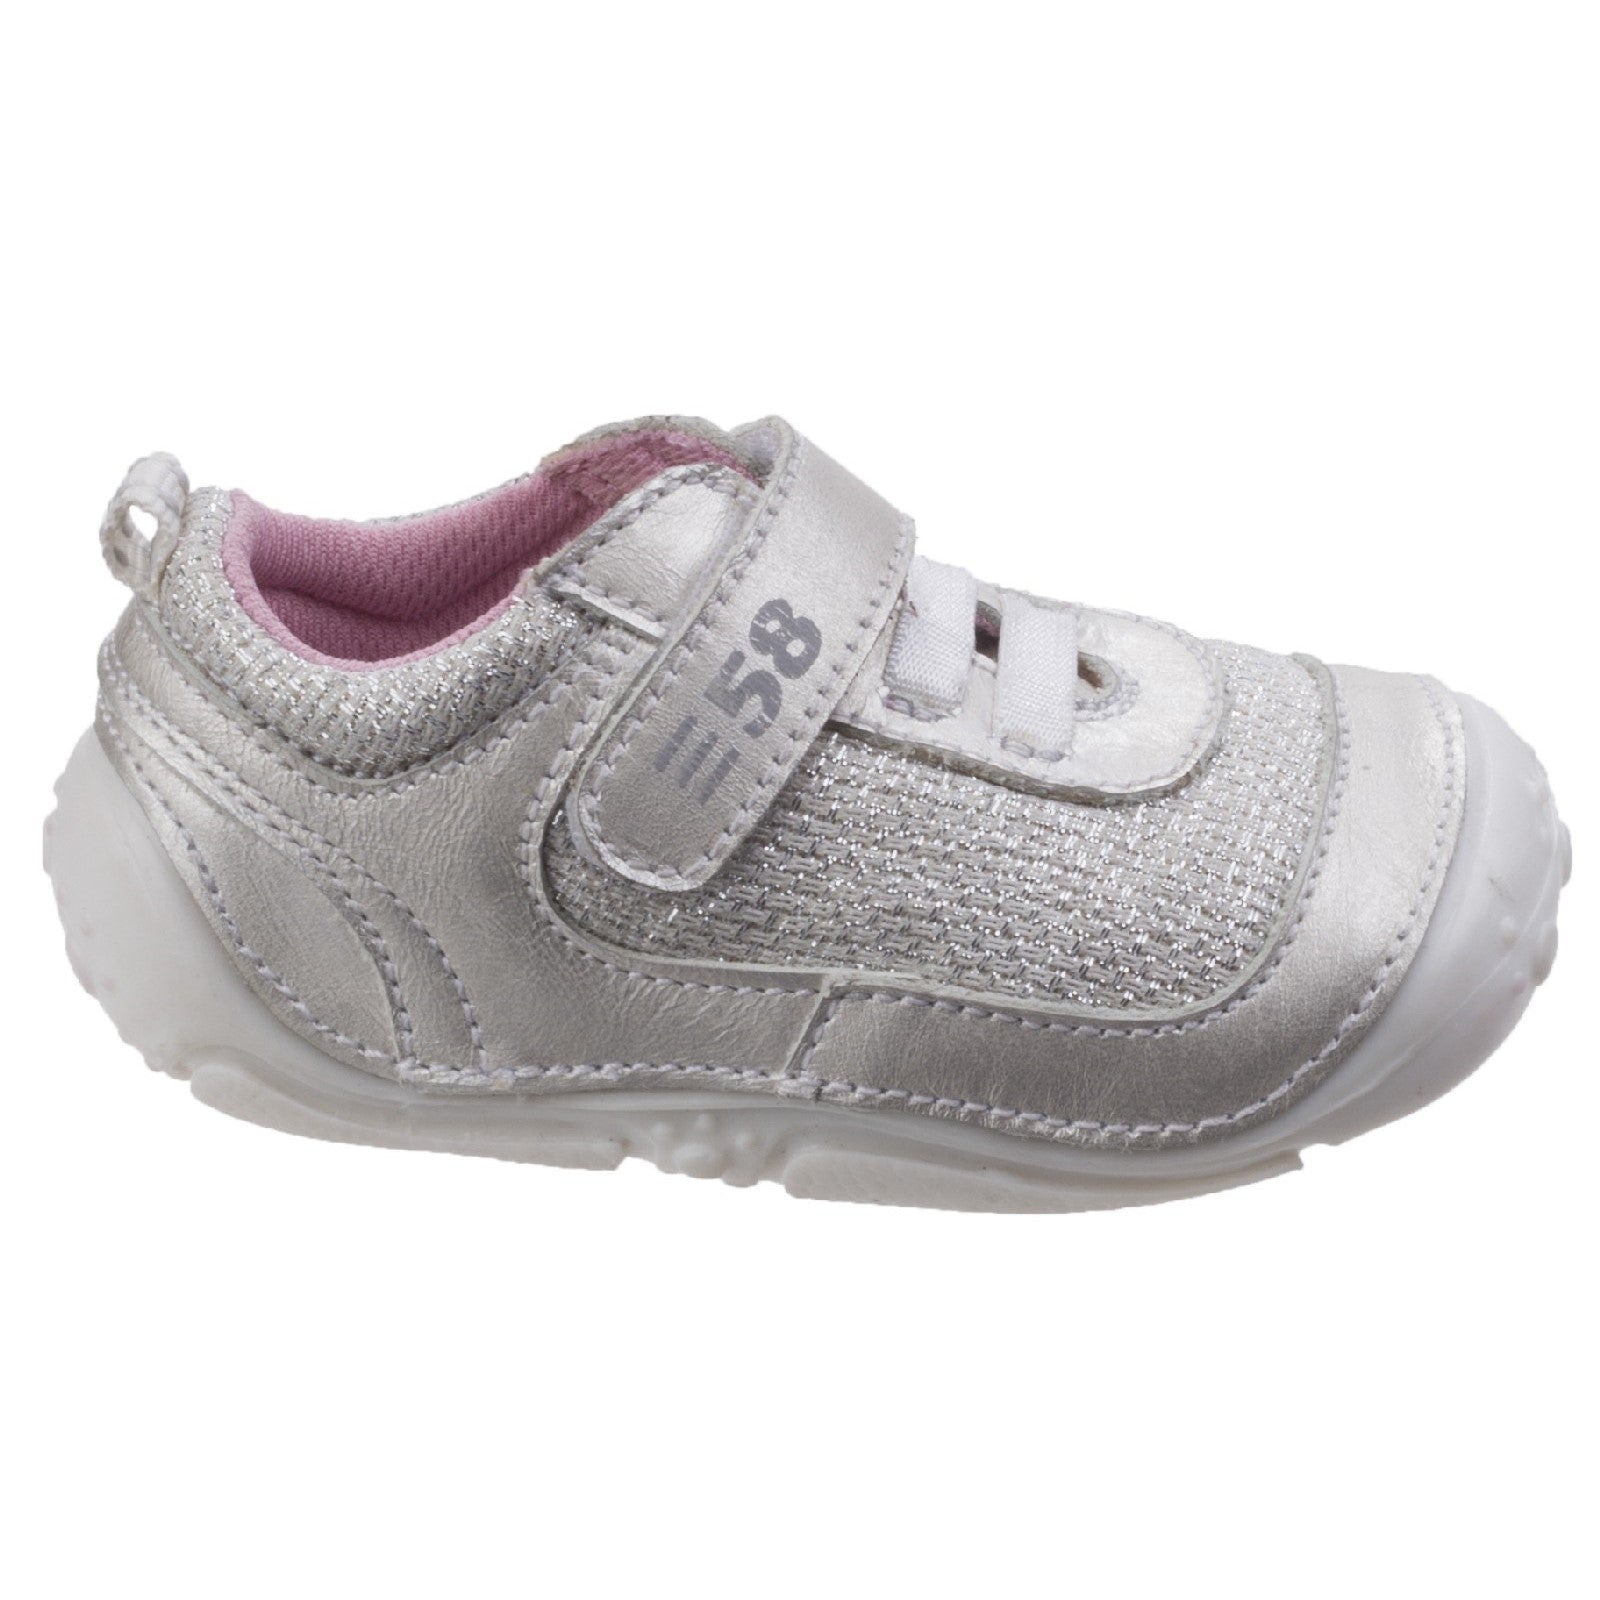 Hush Puppies Infant Girls Livvy Trainers - Silver